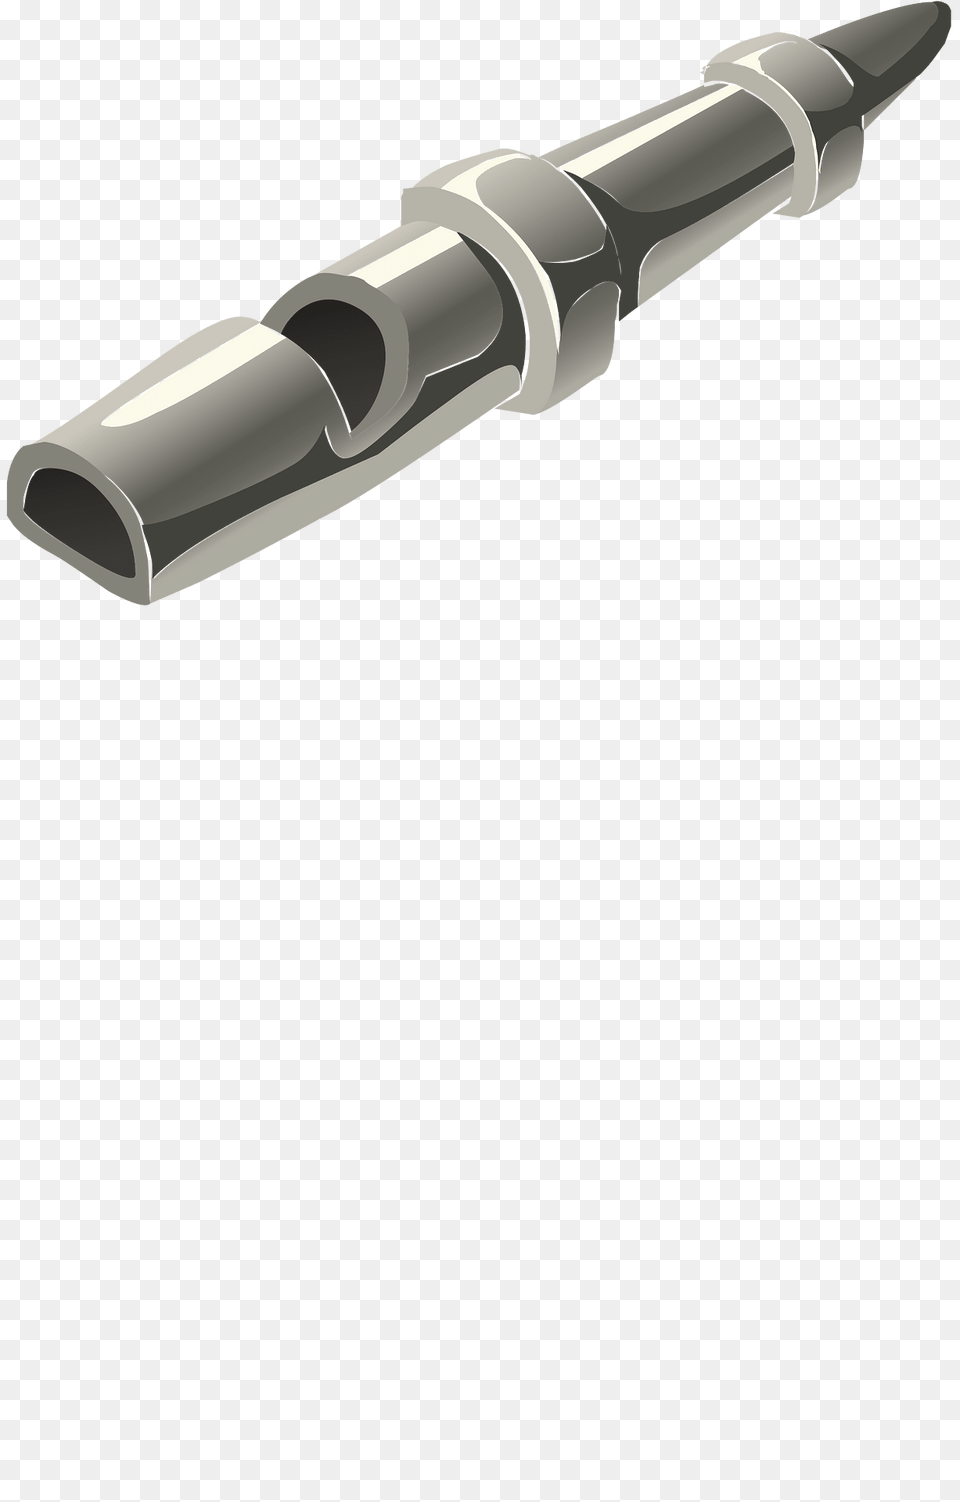 Firefly Whistle Clipart, Ammunition, Bullet, Weapon Png Image